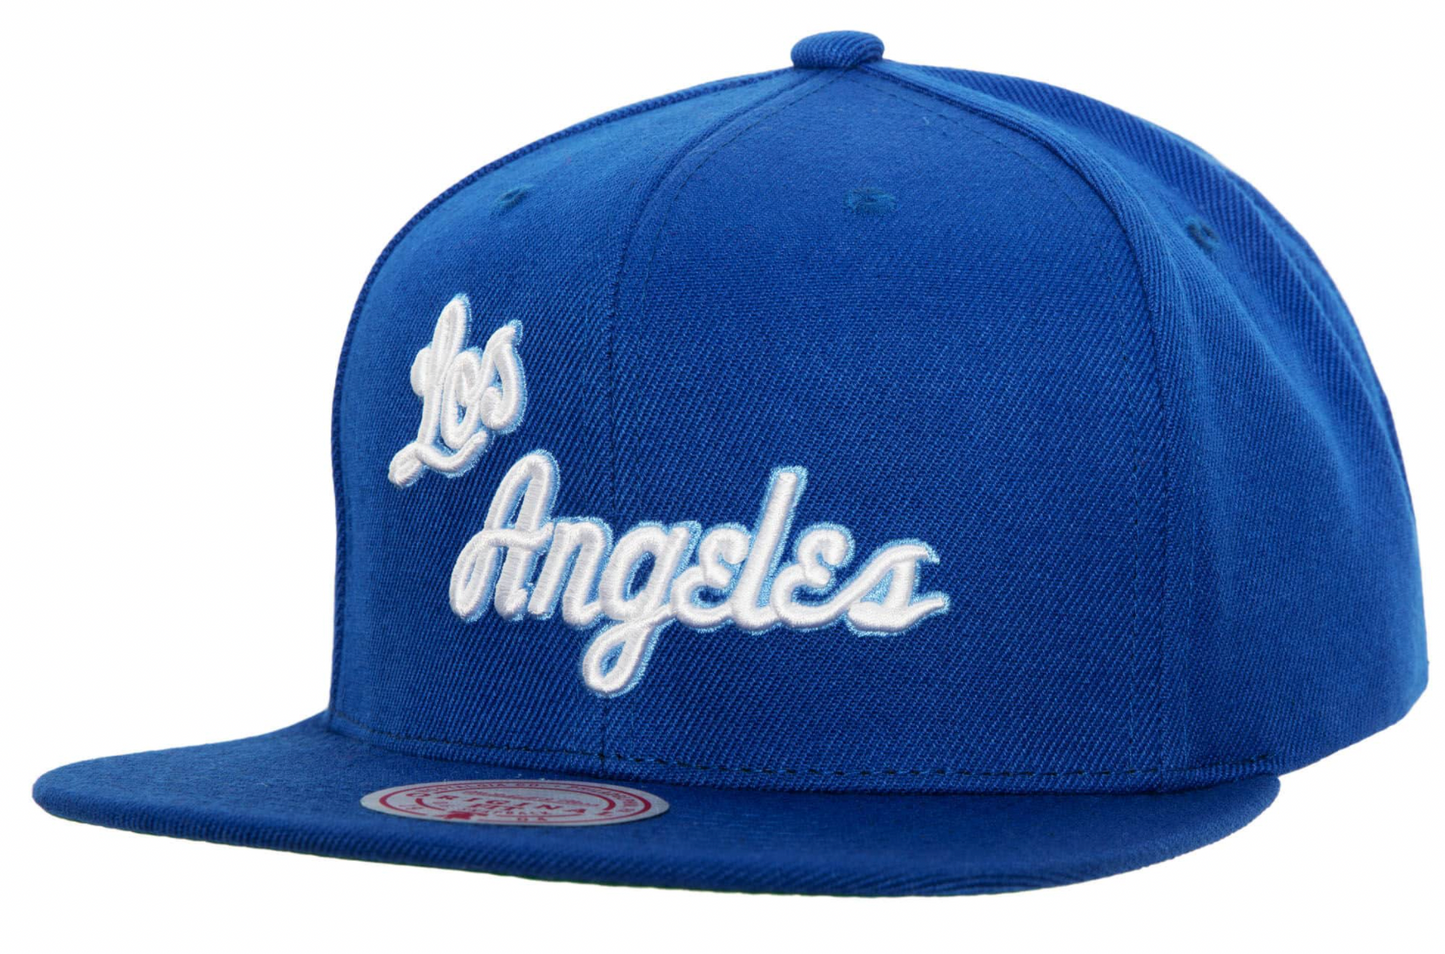 Men's Los Angeles Lakers Mitchell & Ness Blue Core Basic Snapback Hat